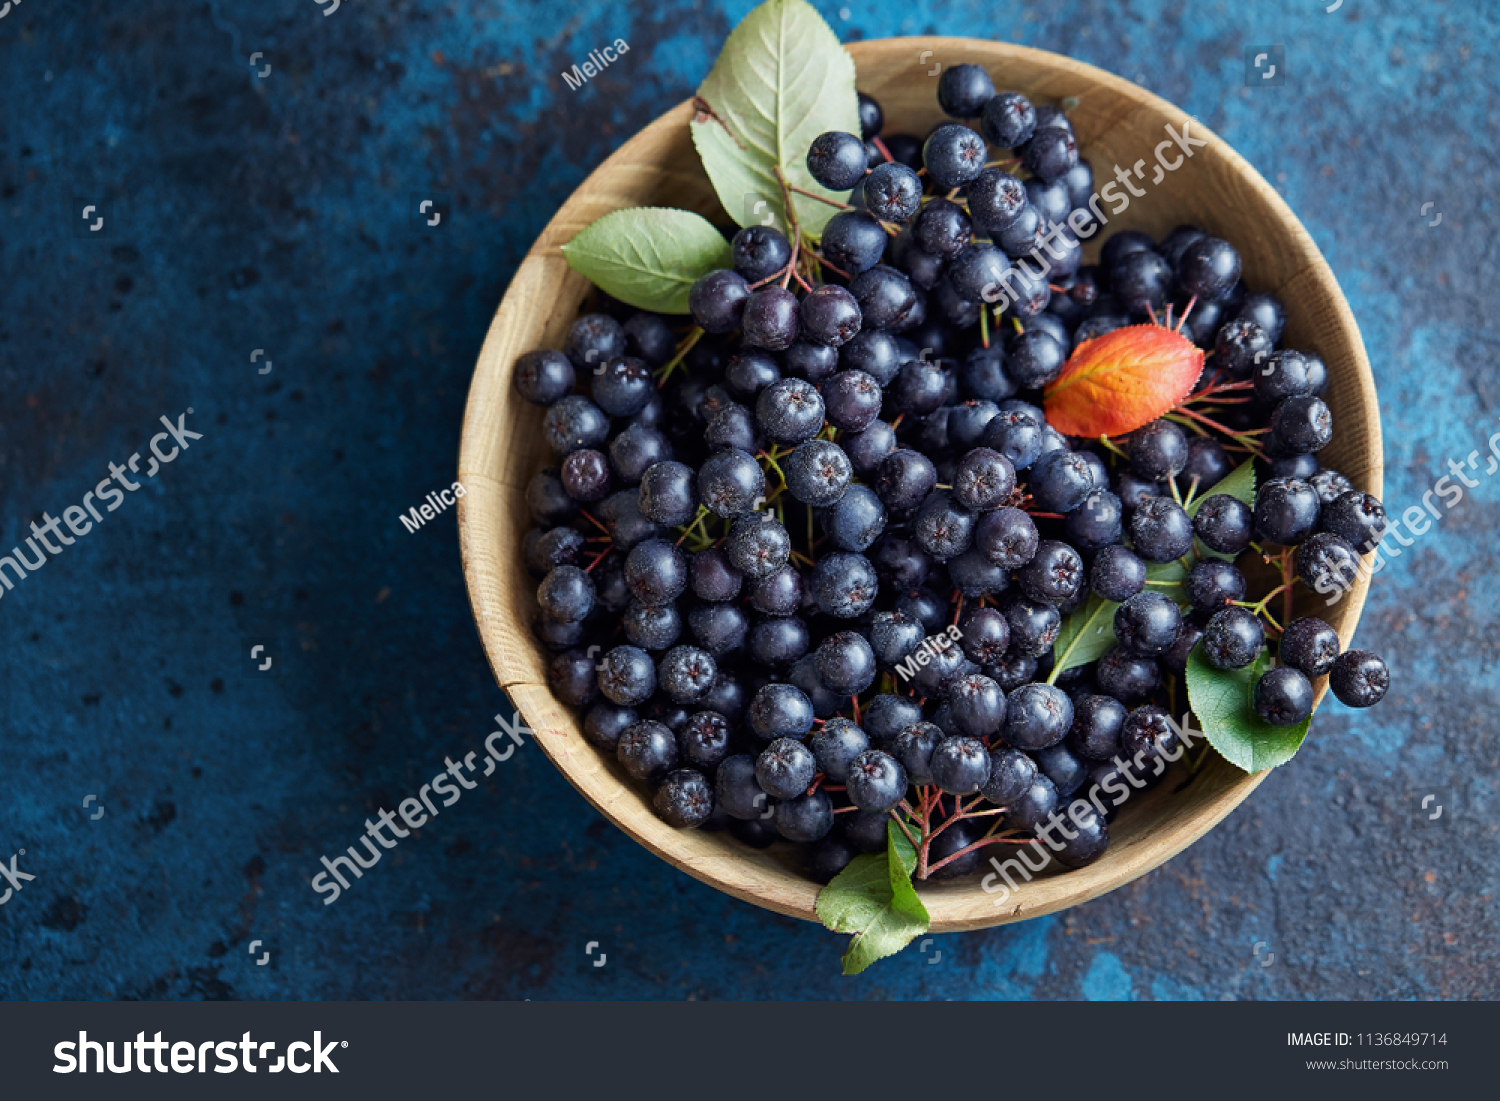 Bowl with freshly picked homegrown aronia berries. Aronia, commonly known as the chokeberry, with leaves #1136849714